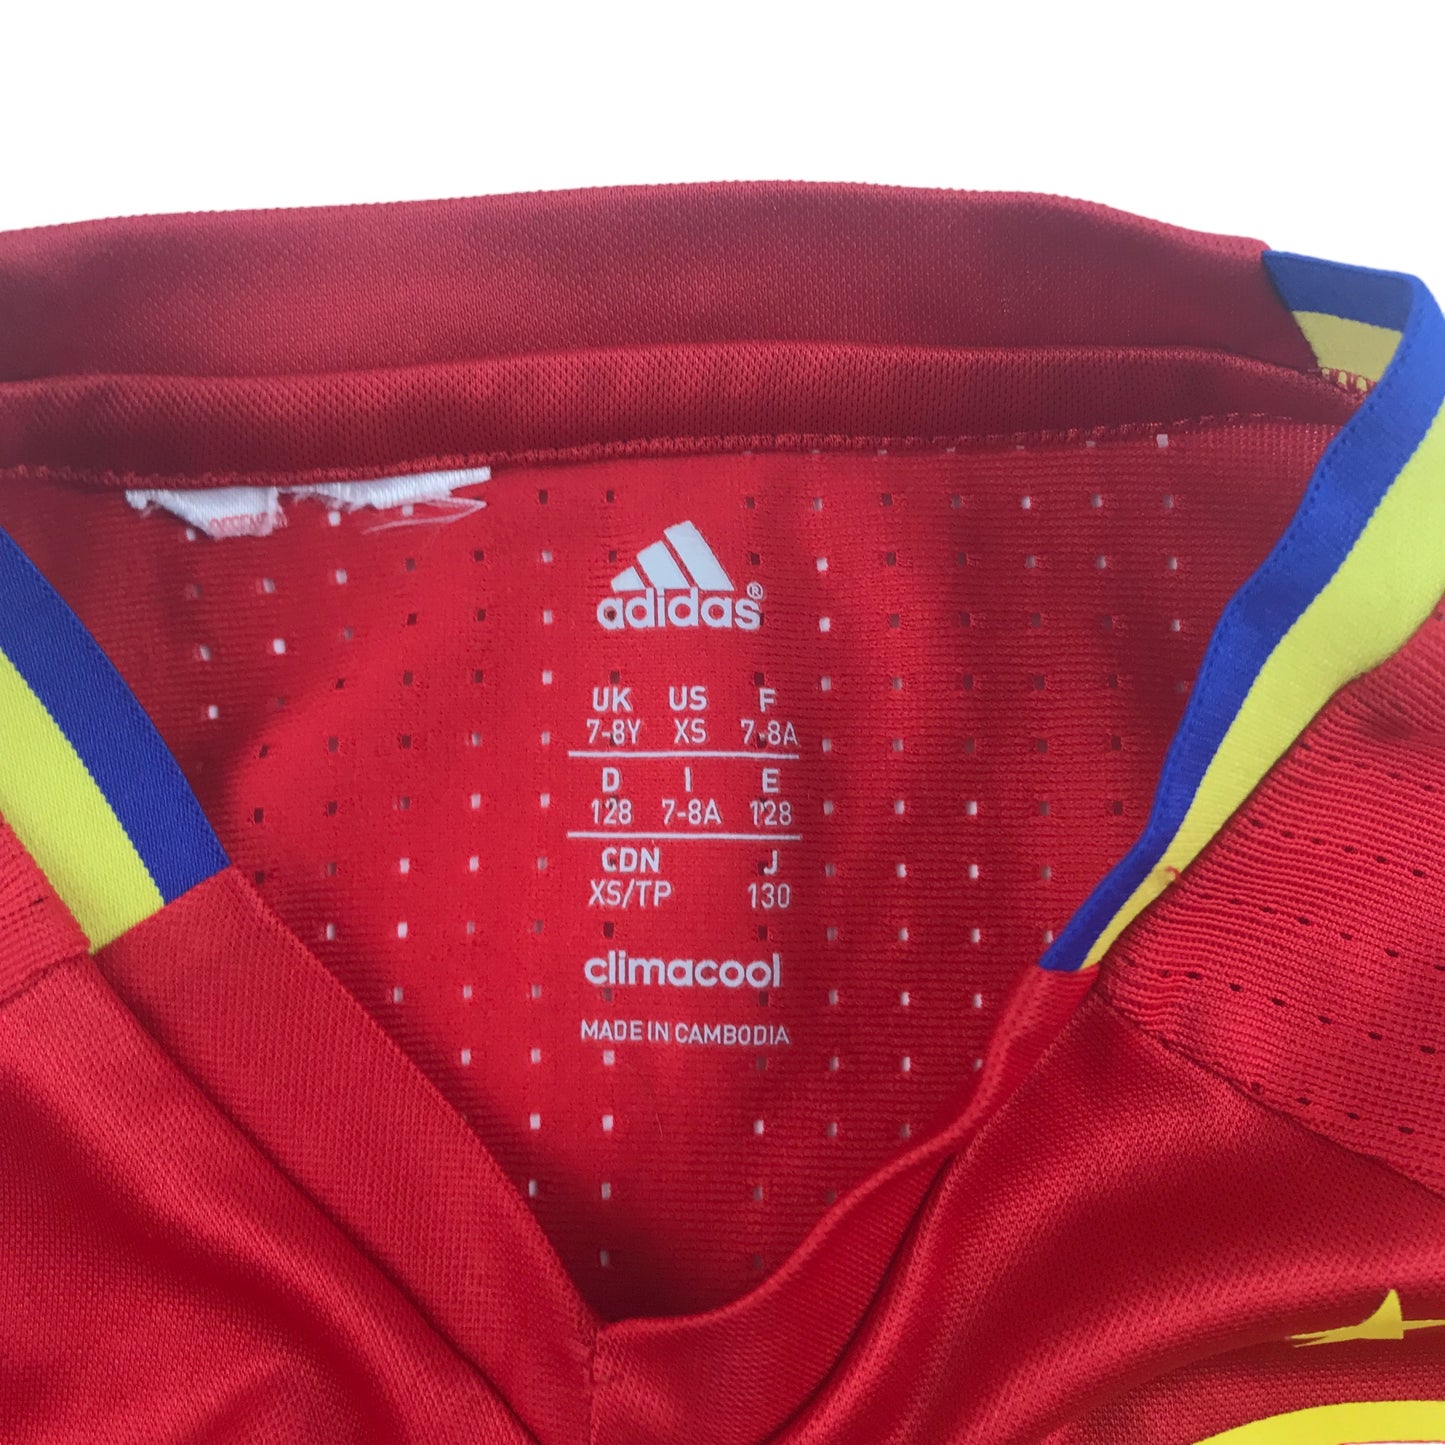 Adidas Spain National Football Stirp Age 7 Red Short Sleeve